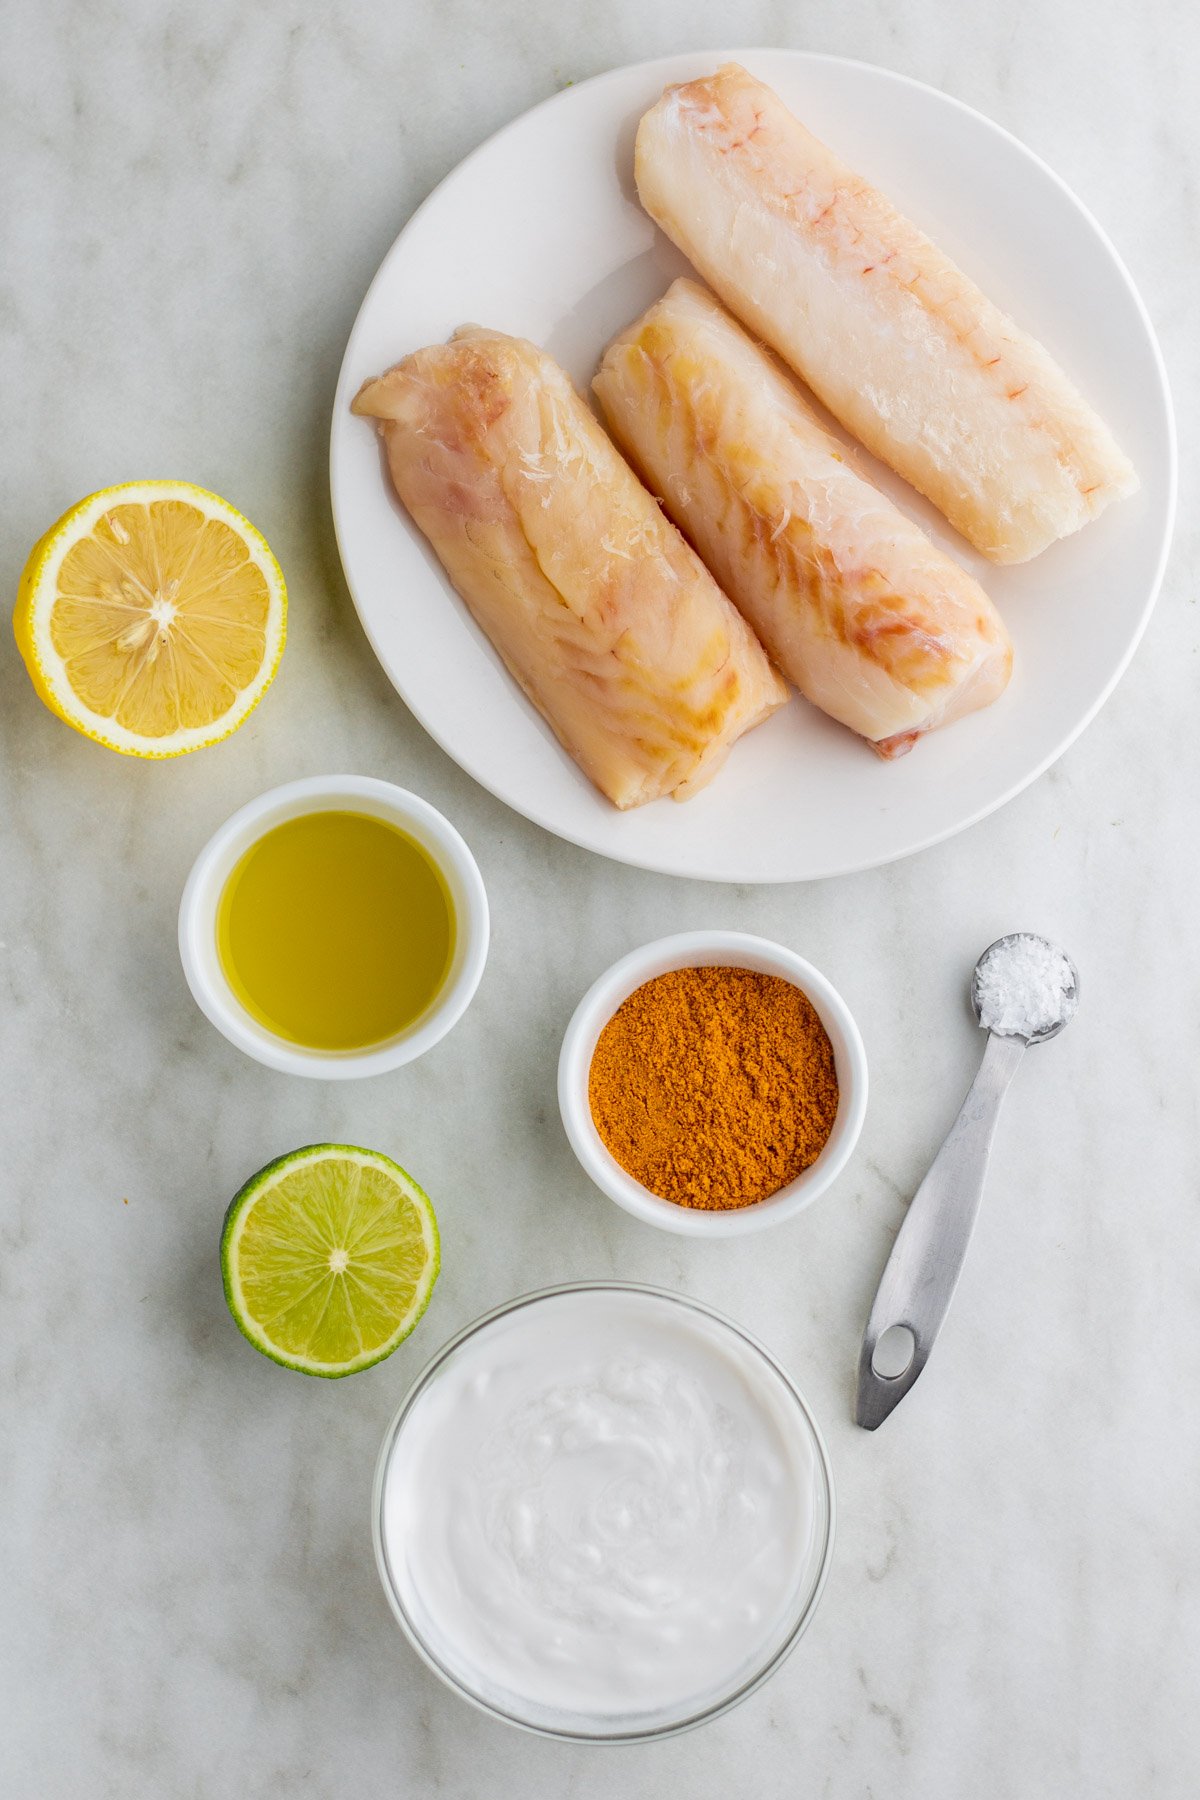 halibut-fish-tacos-with-dairy-free-sour-cream-ingredients